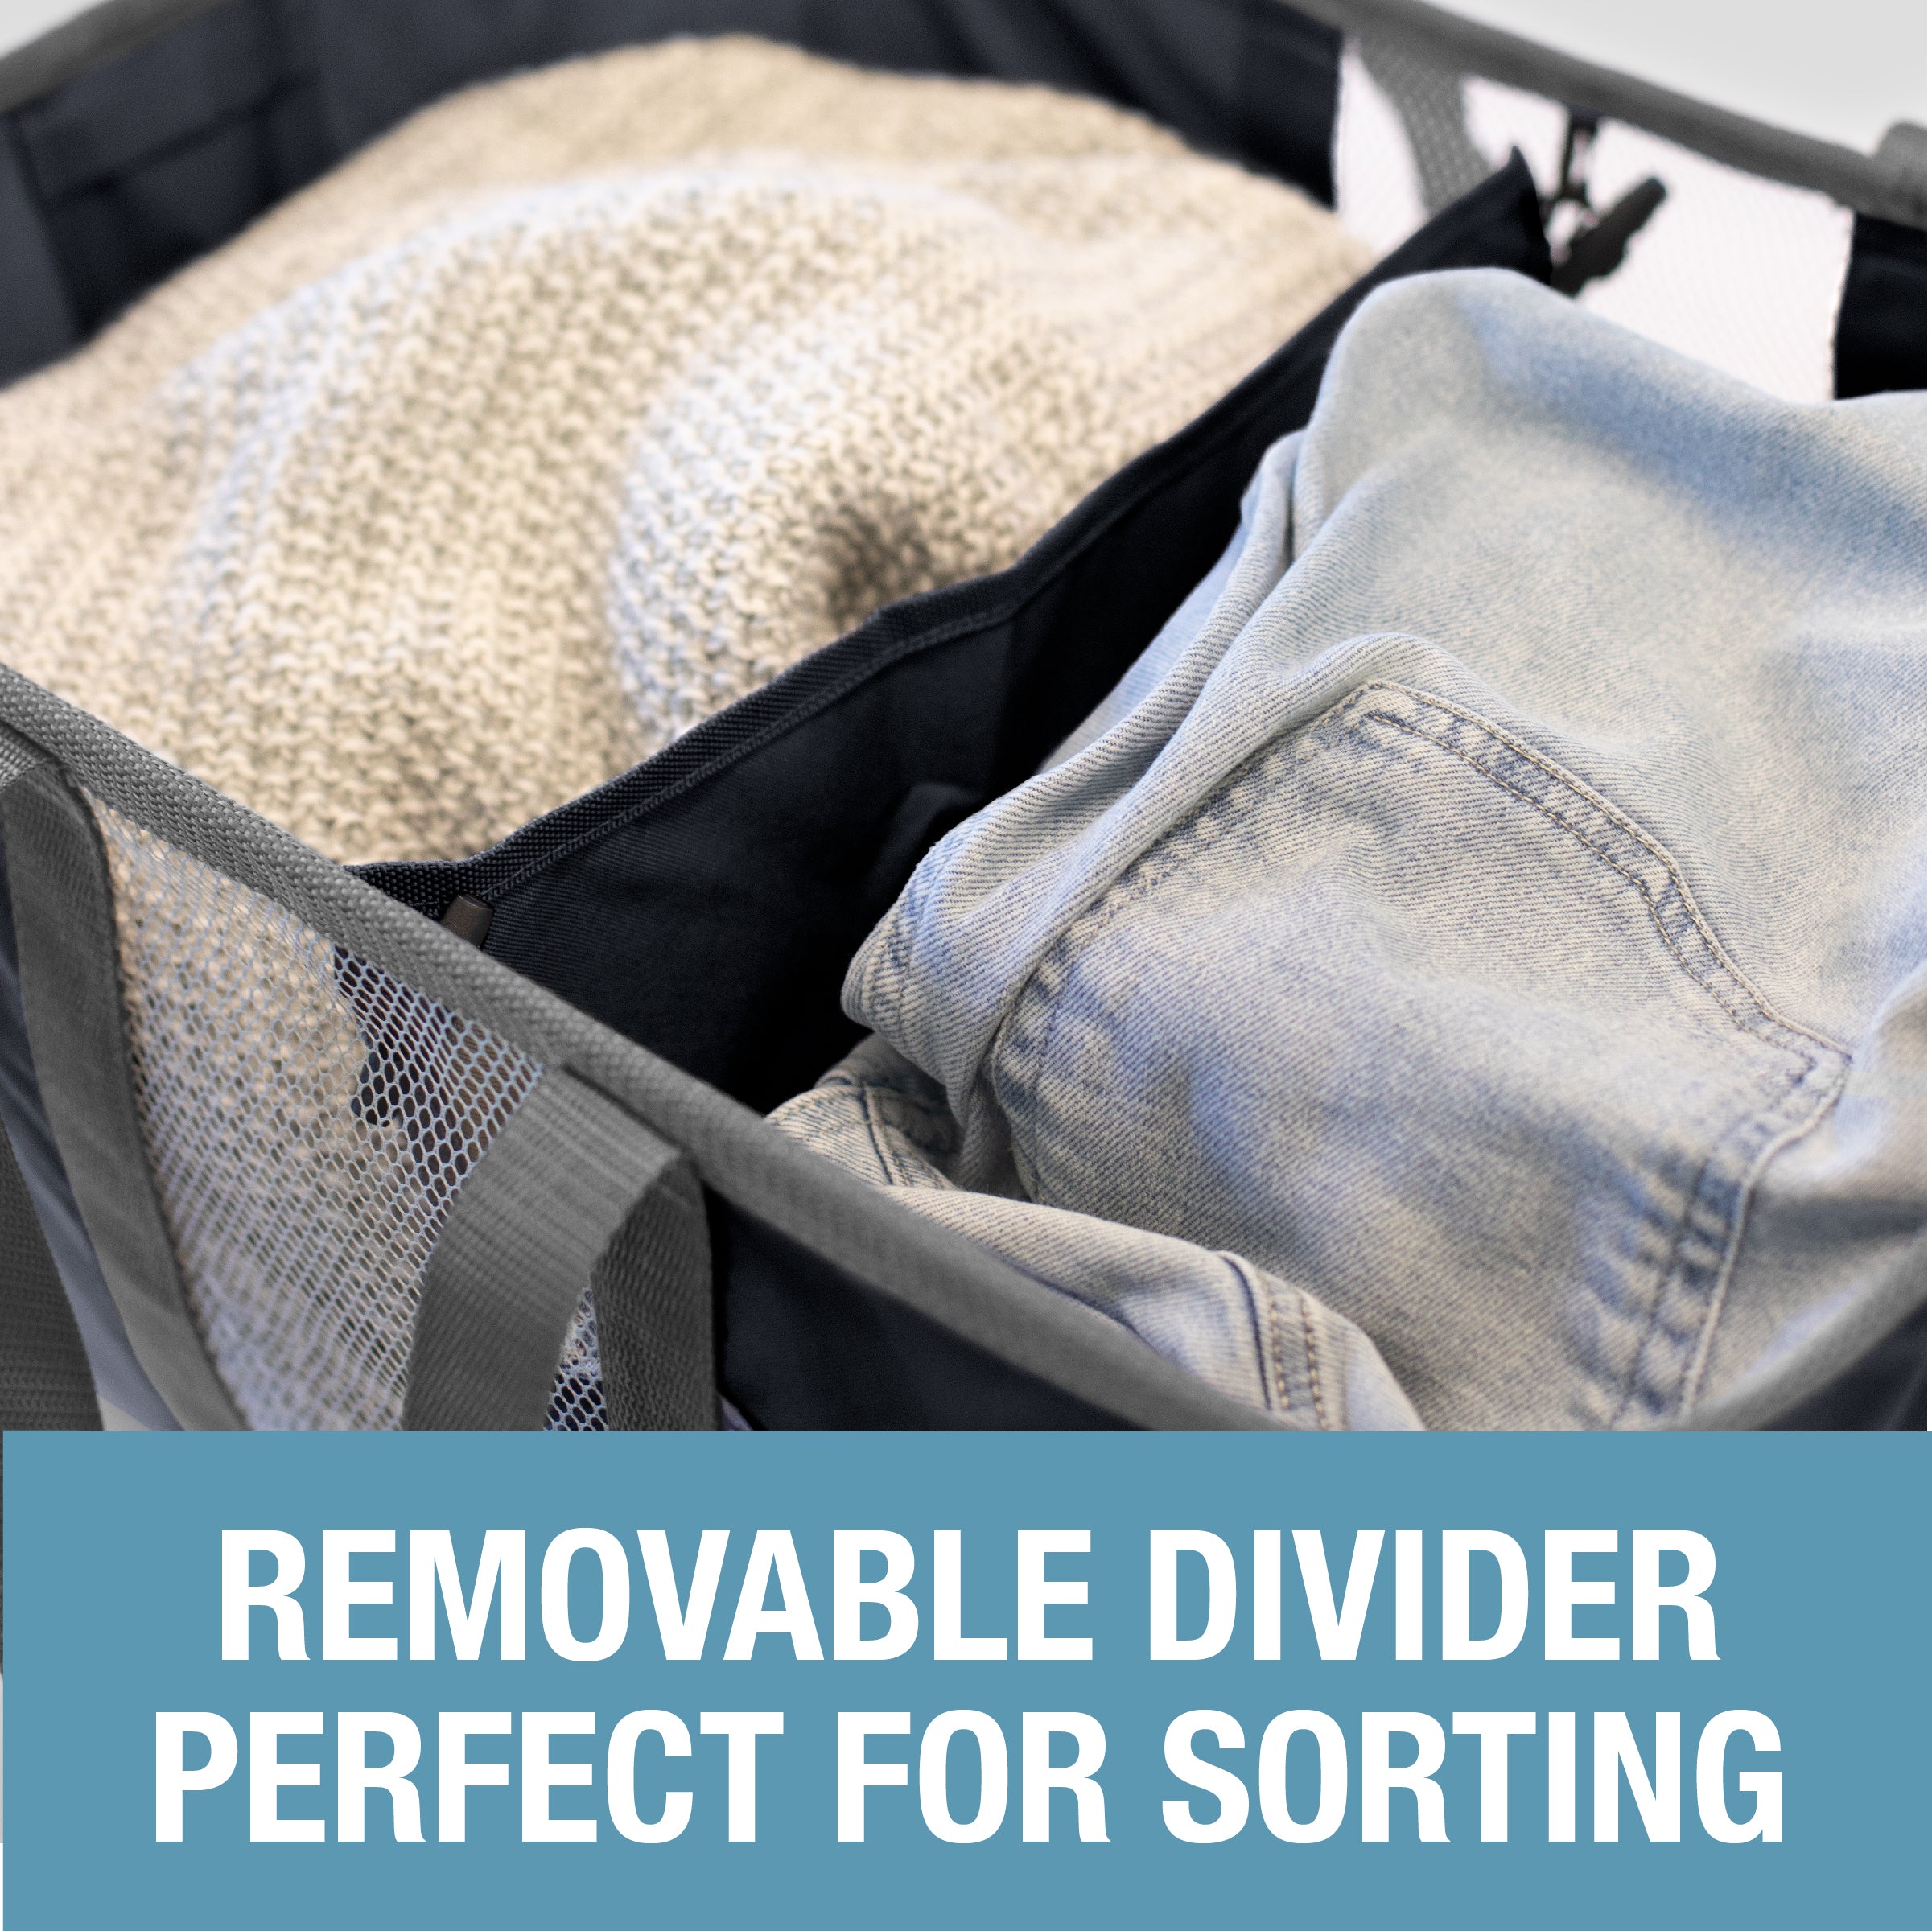  CleverMade Collapsible Fabric Laundry Baskets